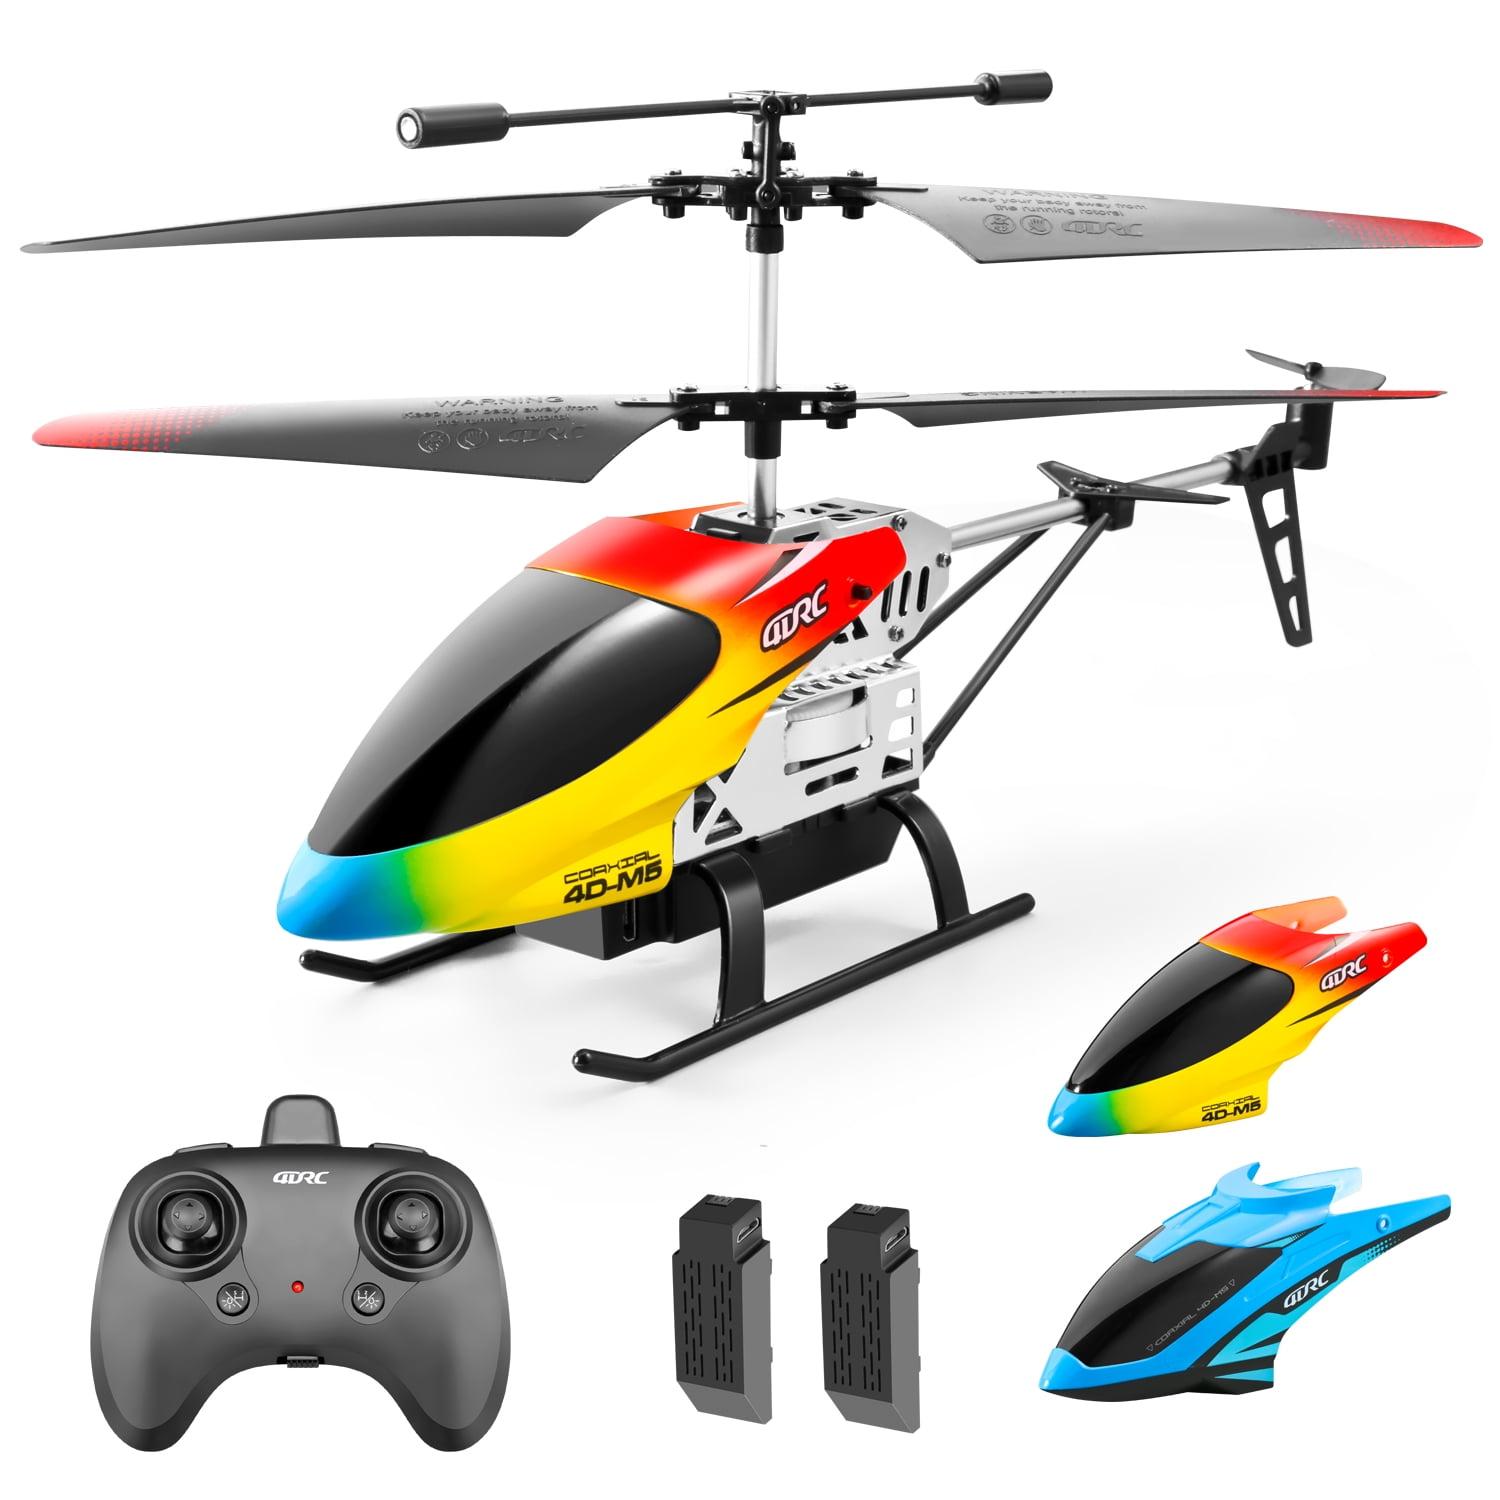 Speed Rc Helicopter: Affordable Options for Speed RC Helicopters